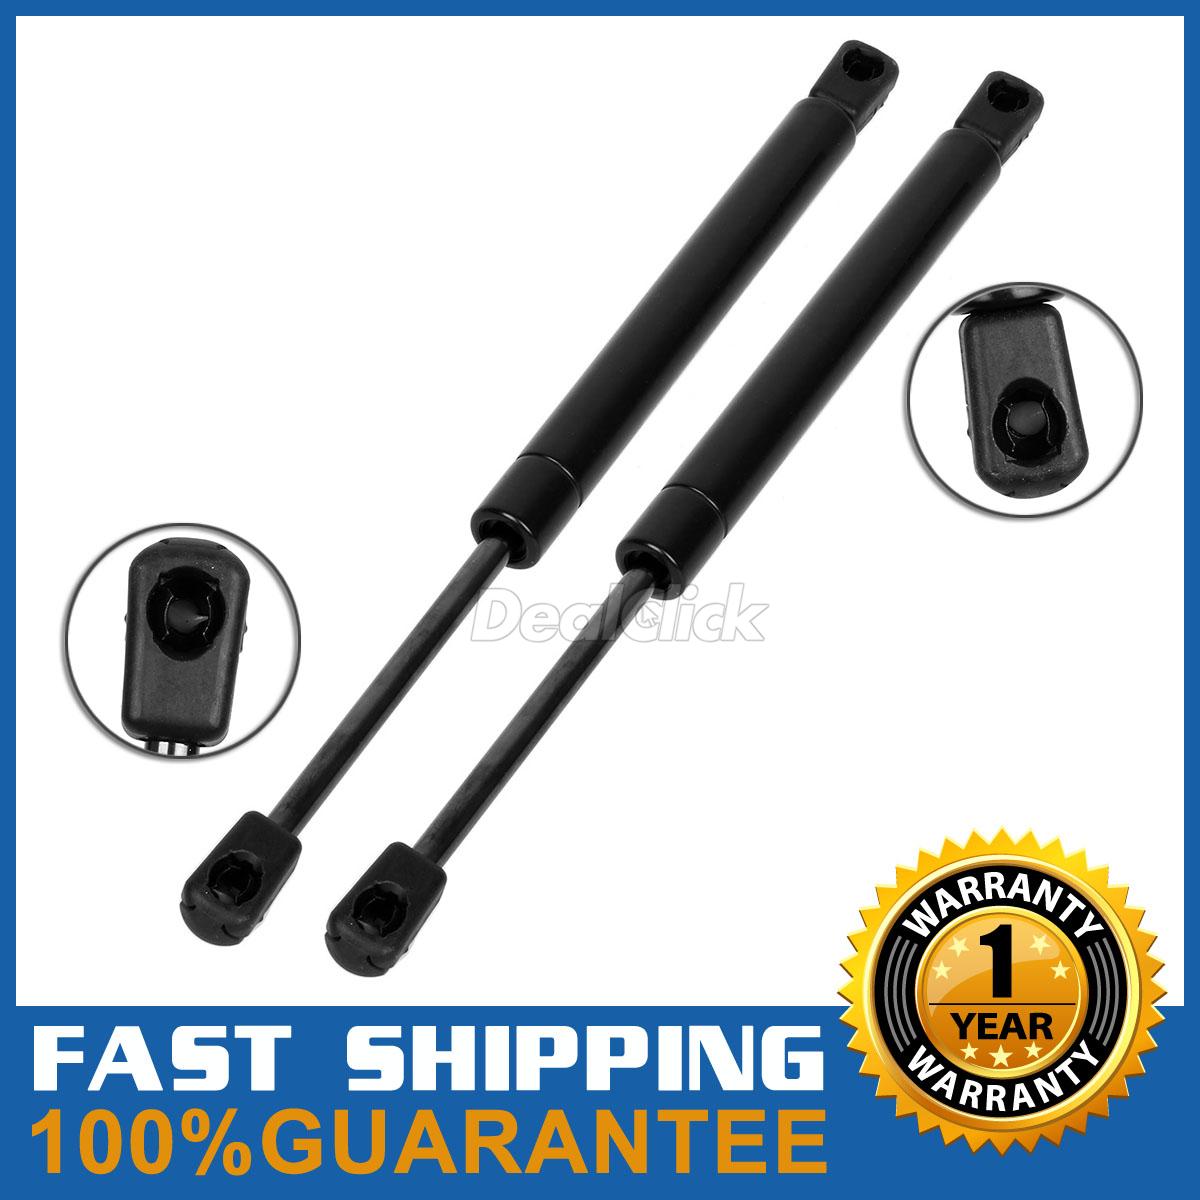 Qty2 Gas Spring Lift Support Shock Prop Universal 60Lbs Froce 10.2mm Eyelet Ends